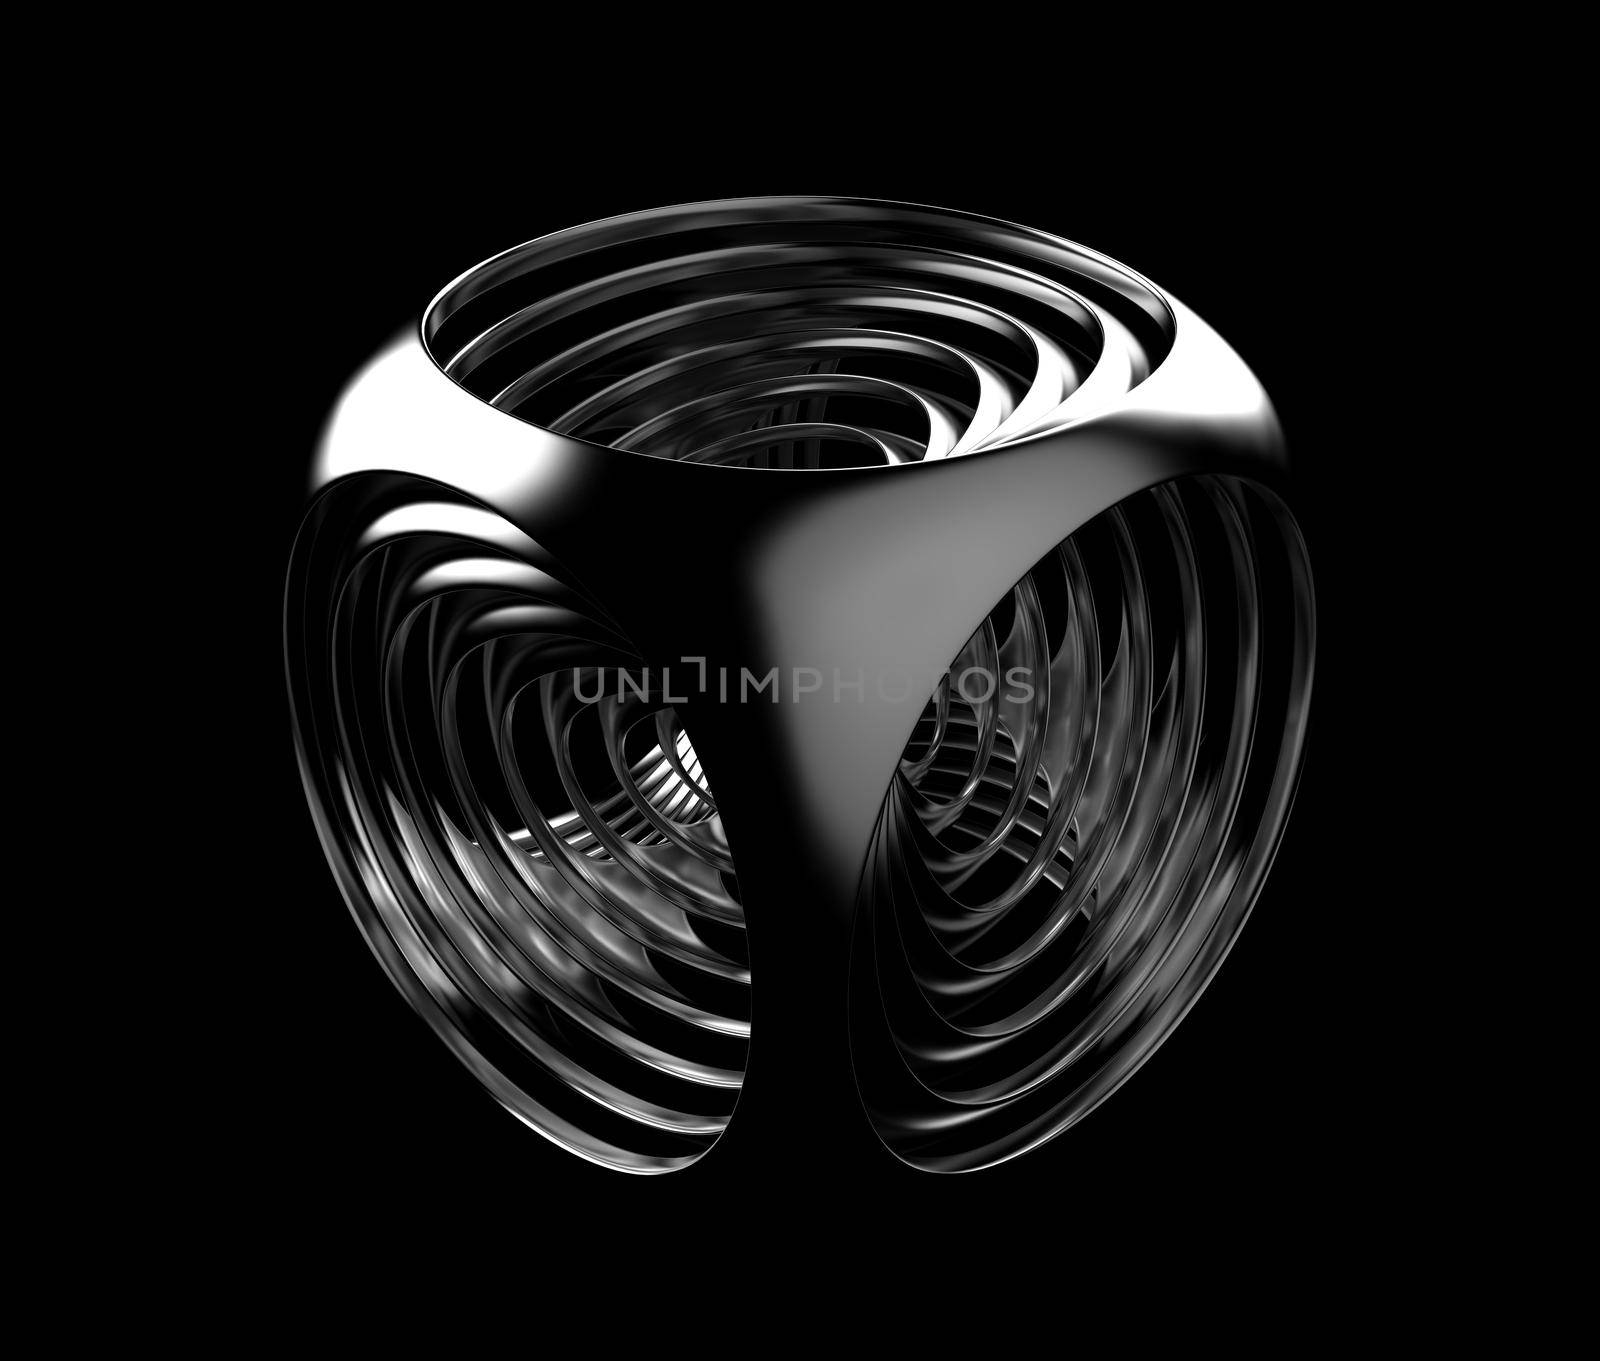 Black and white cubic abstraction. Repeating silver fillet cubes scaling down in size. Digital art, 3D rendering illustration